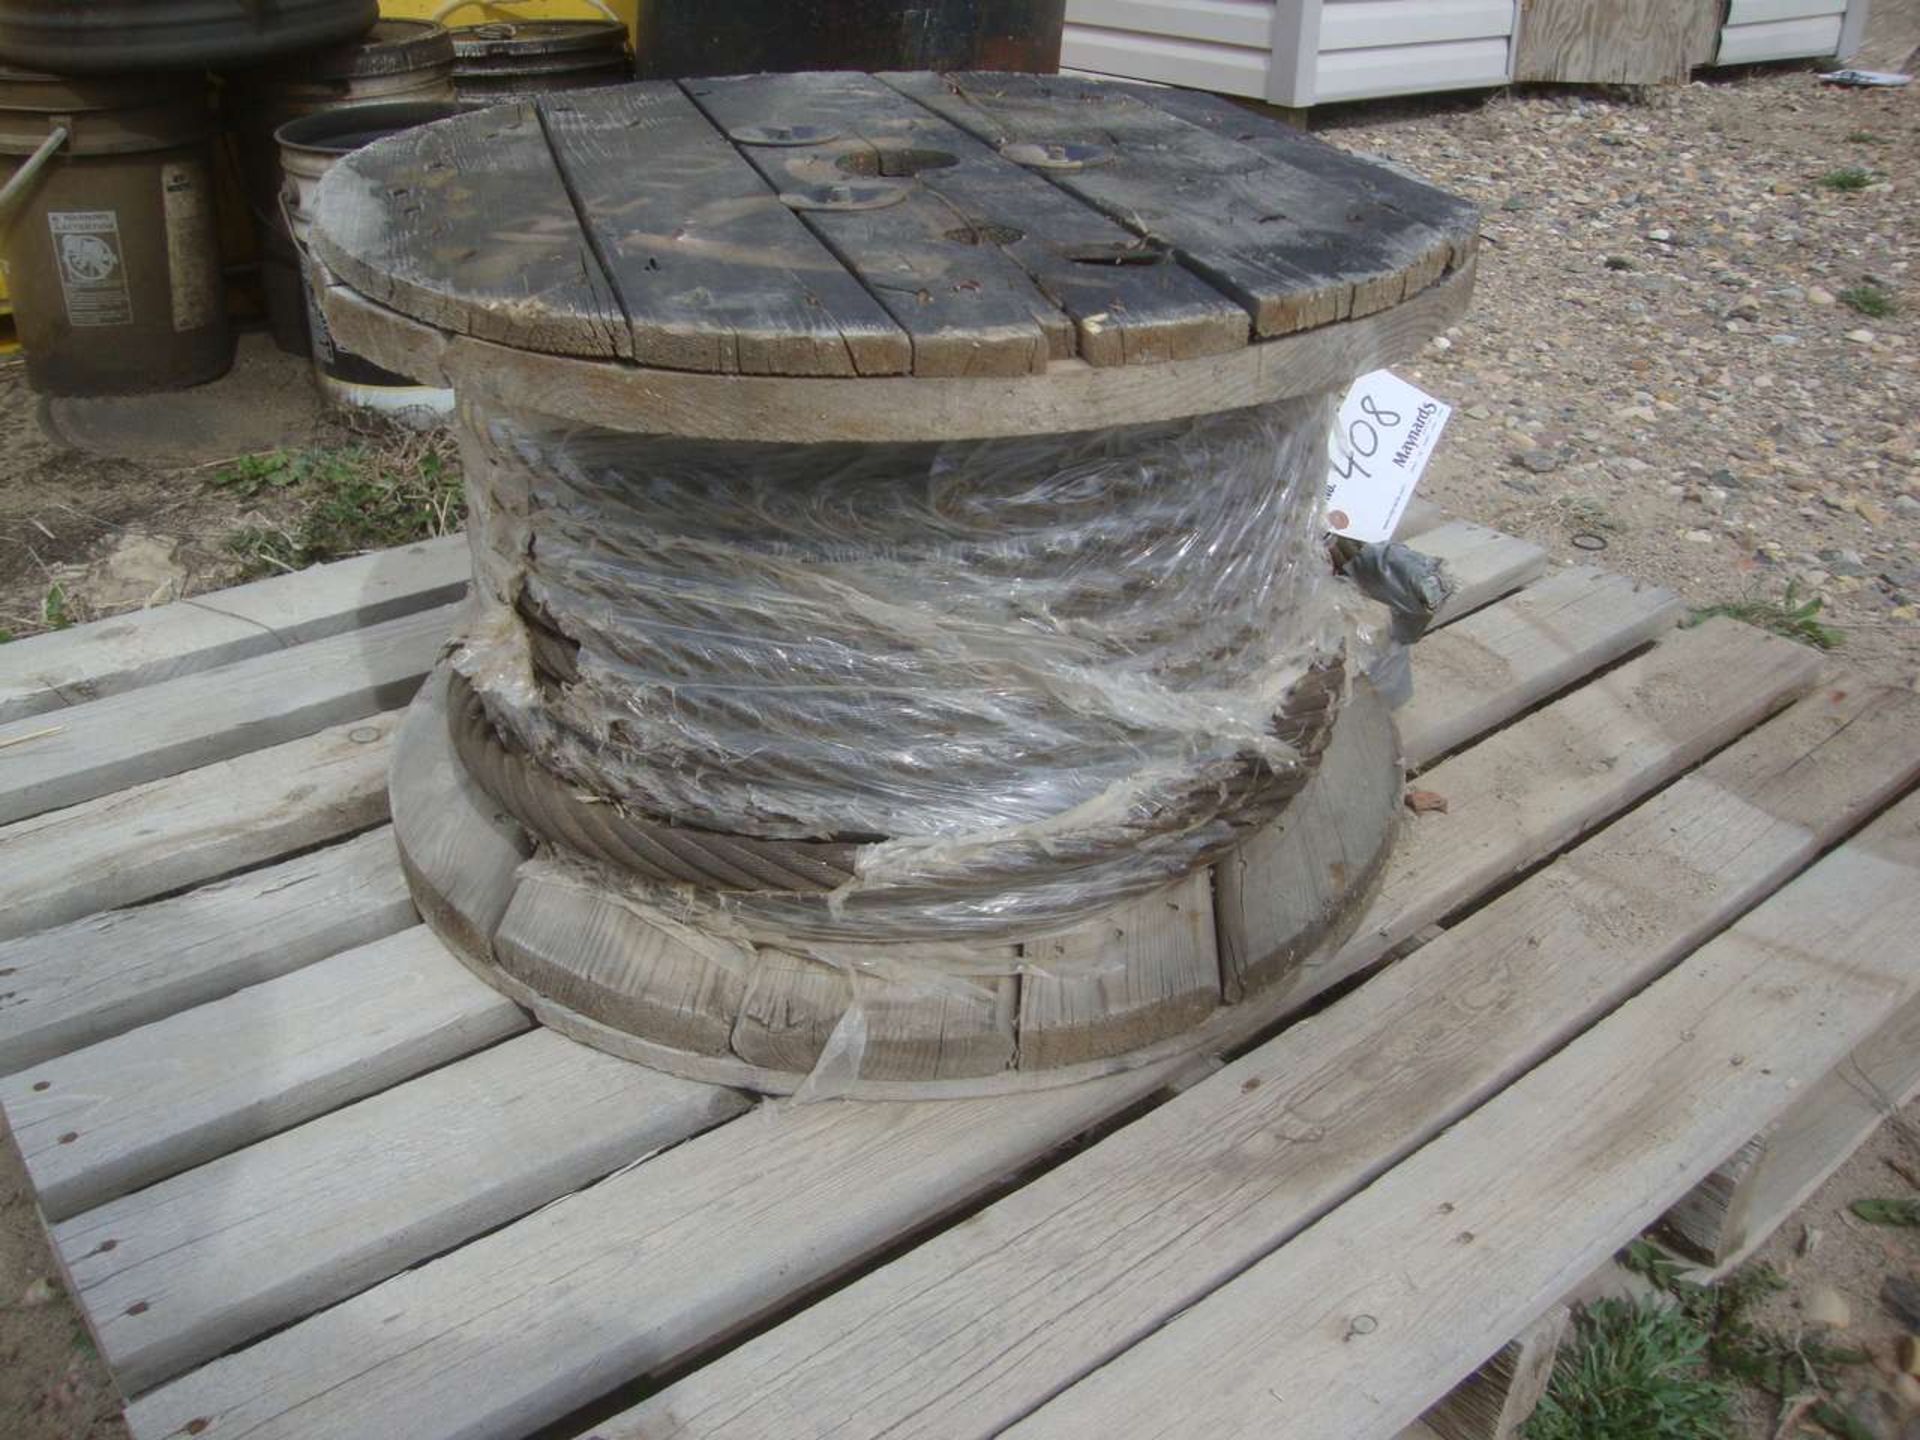 Spool of steel cable 1"